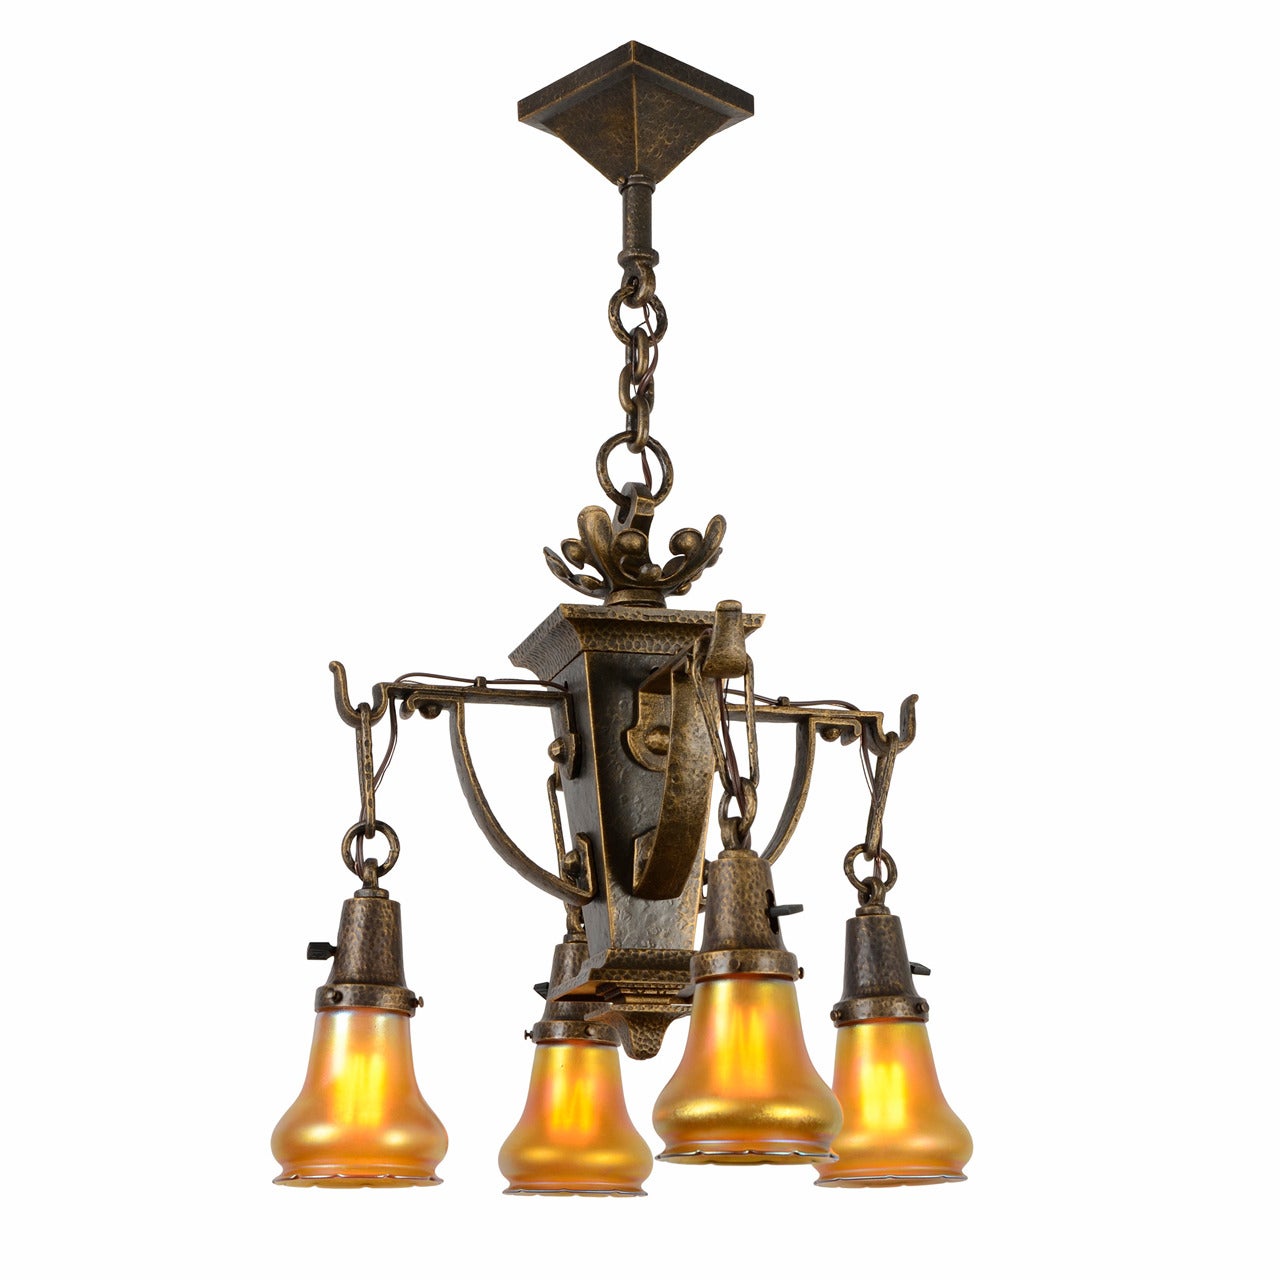 Ornate American Arts and Crafts Chandelier with Quezal Shades, circa 1915